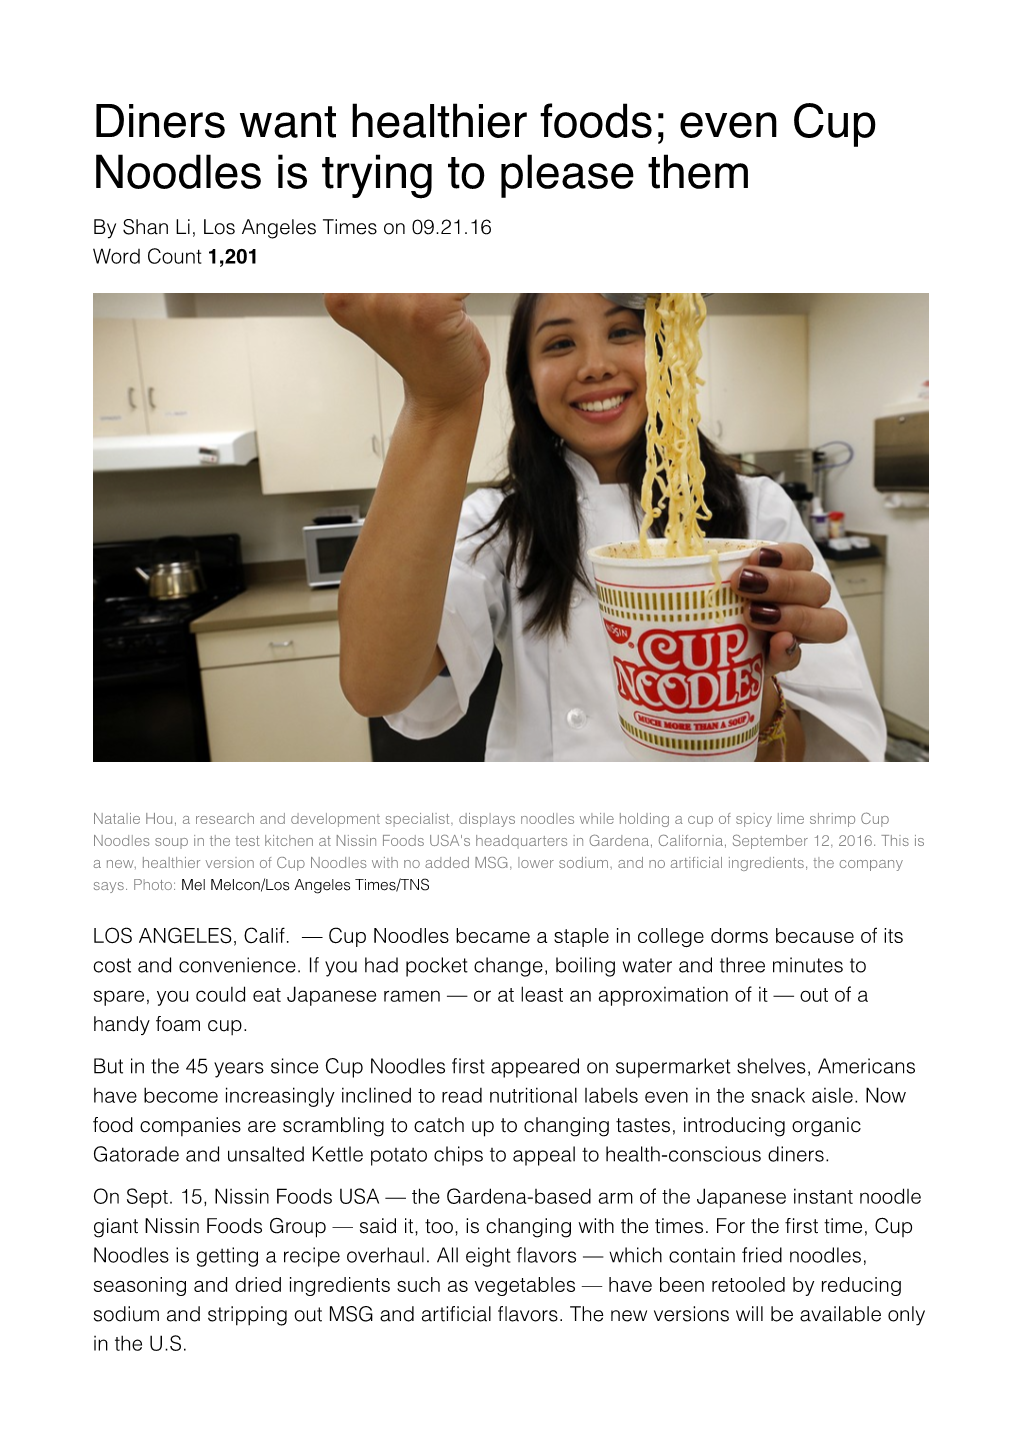 Diners Want Healthier Foods; Even Cup Noodles Is Trying to Please Them by Shan Li, Los Angeles Times on 09.21.16 Word Count 1,201